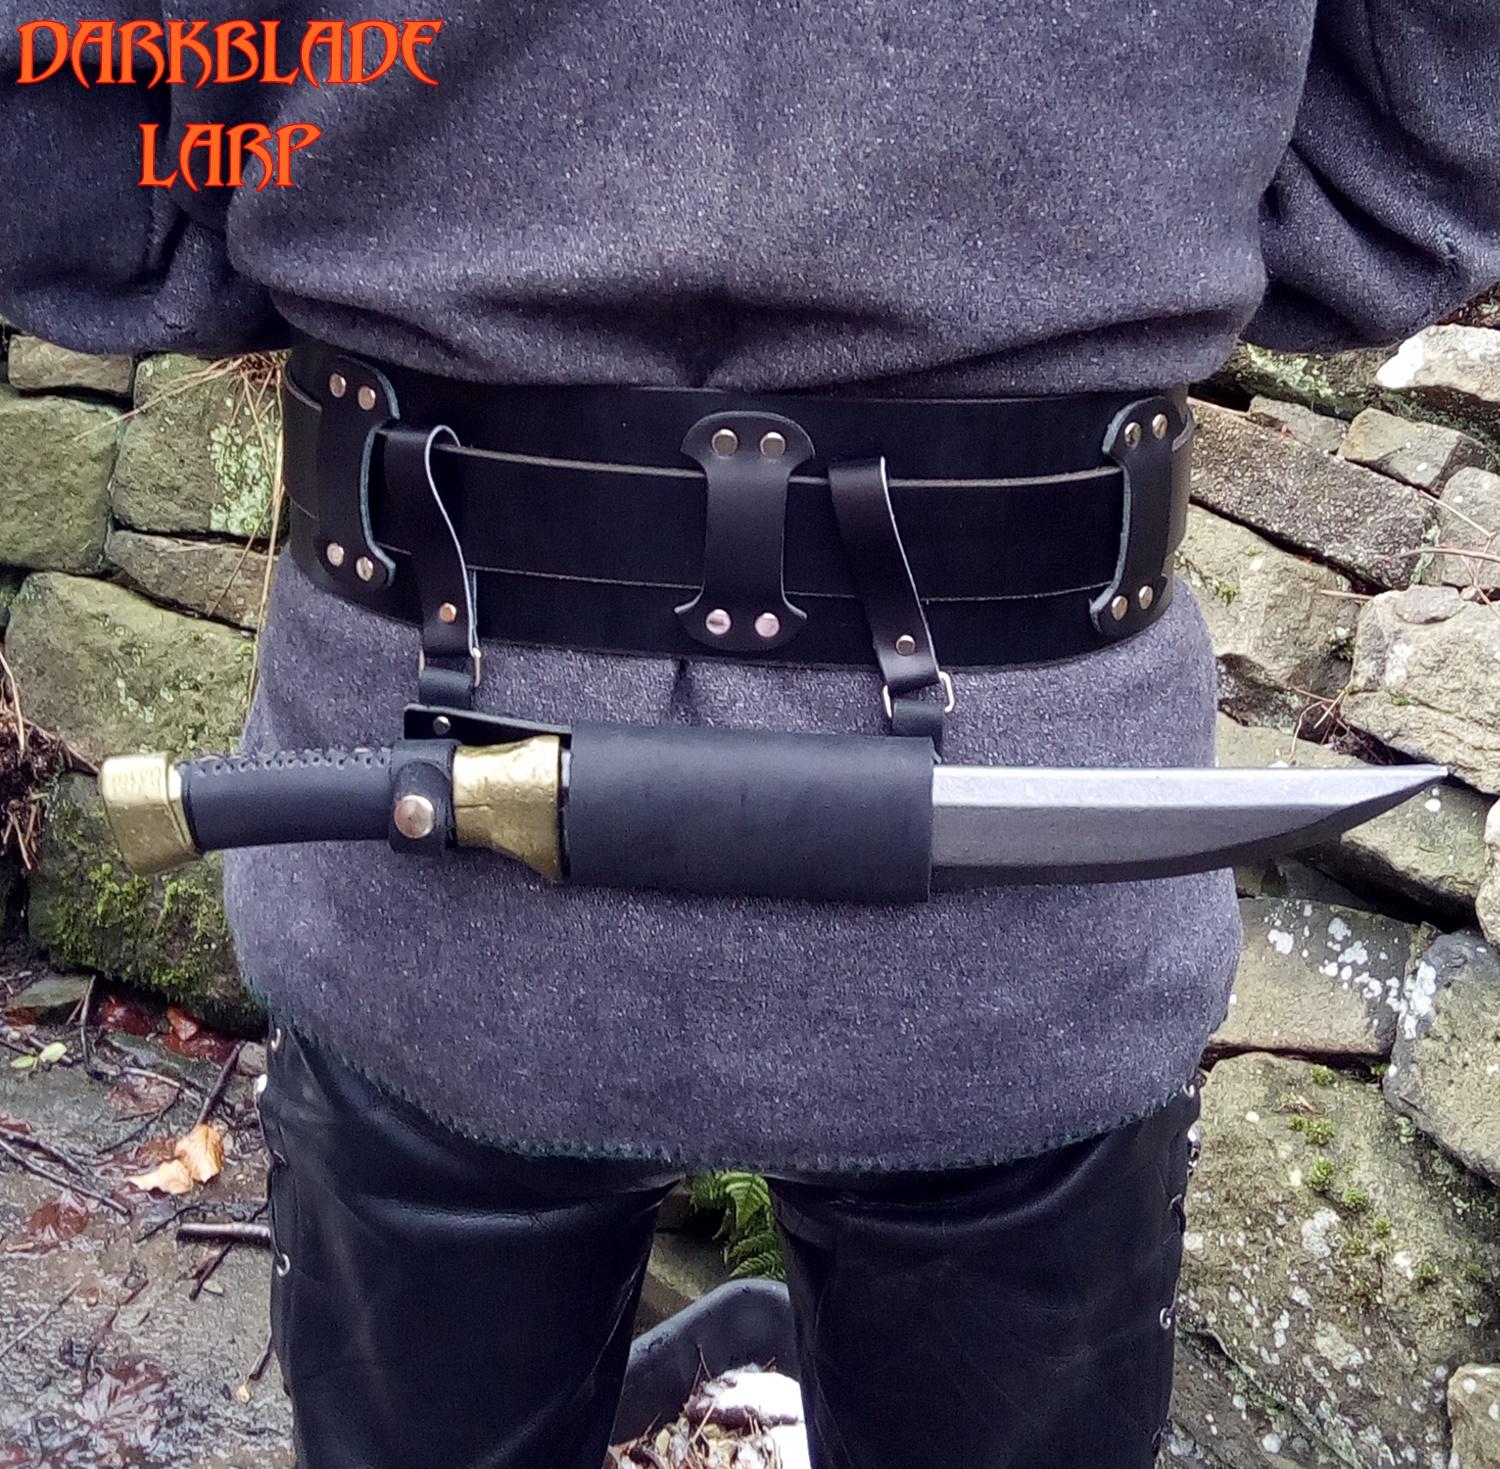 A dagger scabbard attached horizontally to the belt